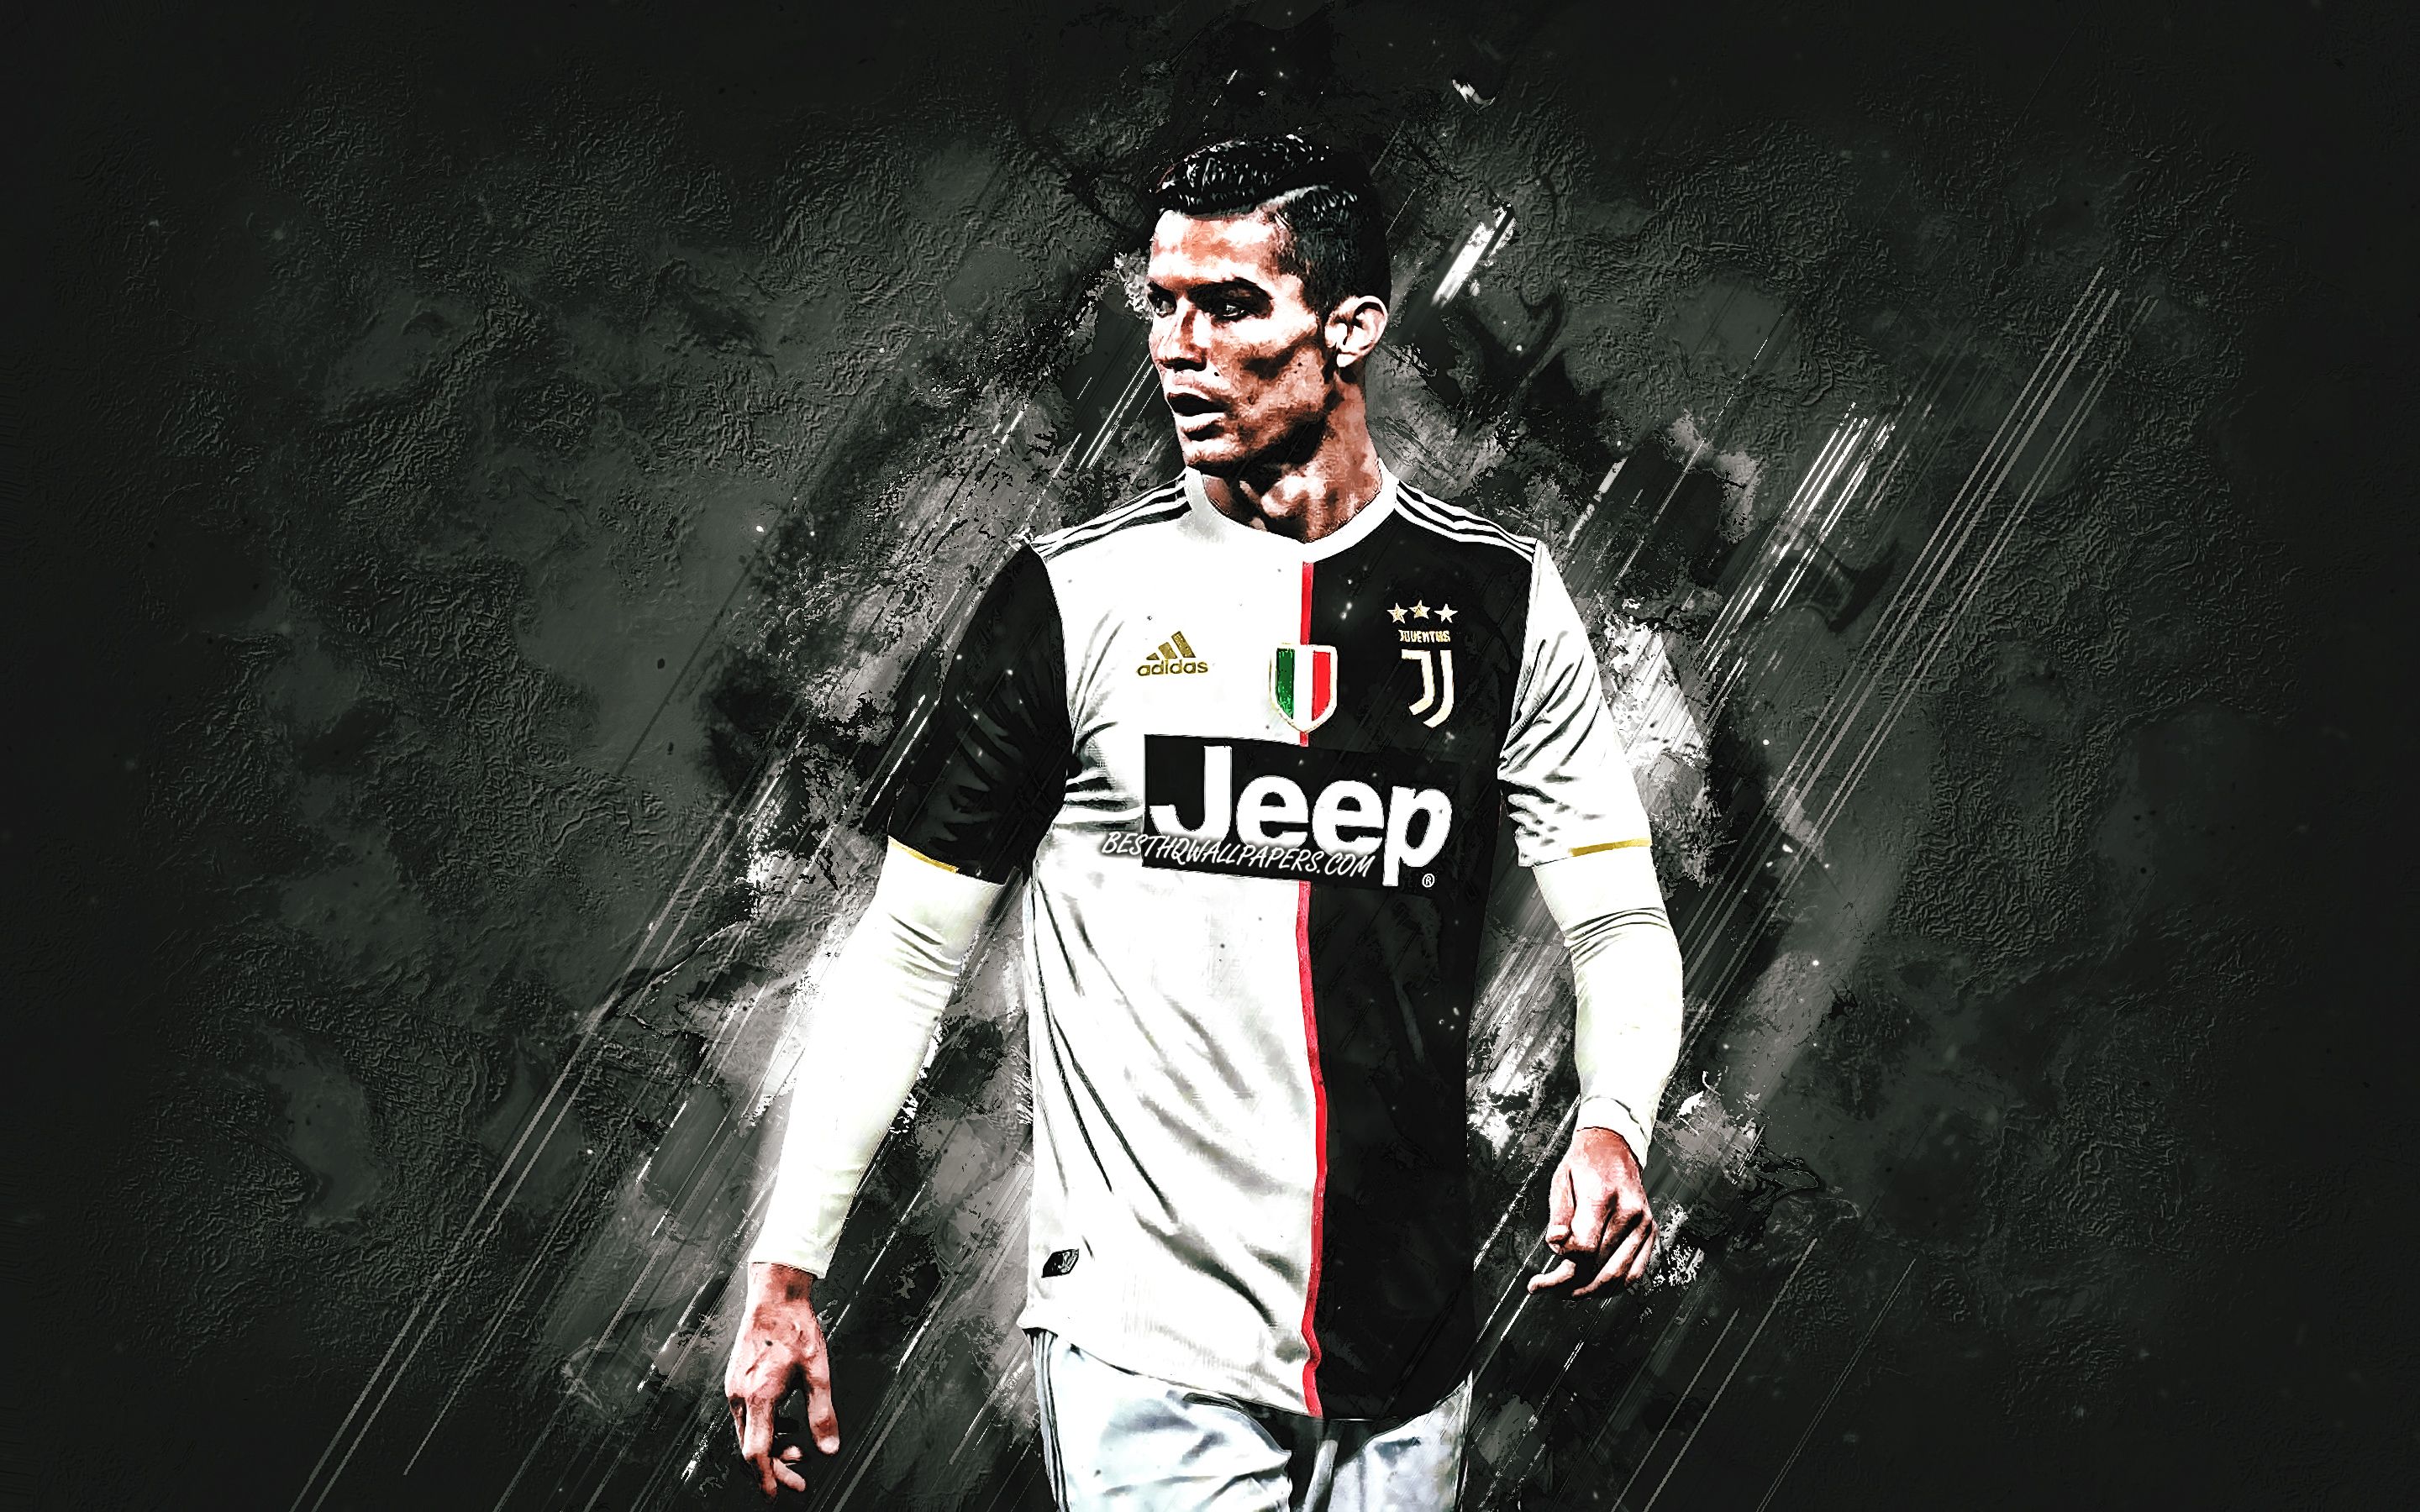 Download wallpaper Cristiano Ronaldo, portrait, Juventus FC, new Juventus uniforms, football players Juventus Portuguese football player, football stars, Serie A, Italy, football for desktop with resolution 2880x1800. High Quality HD picture